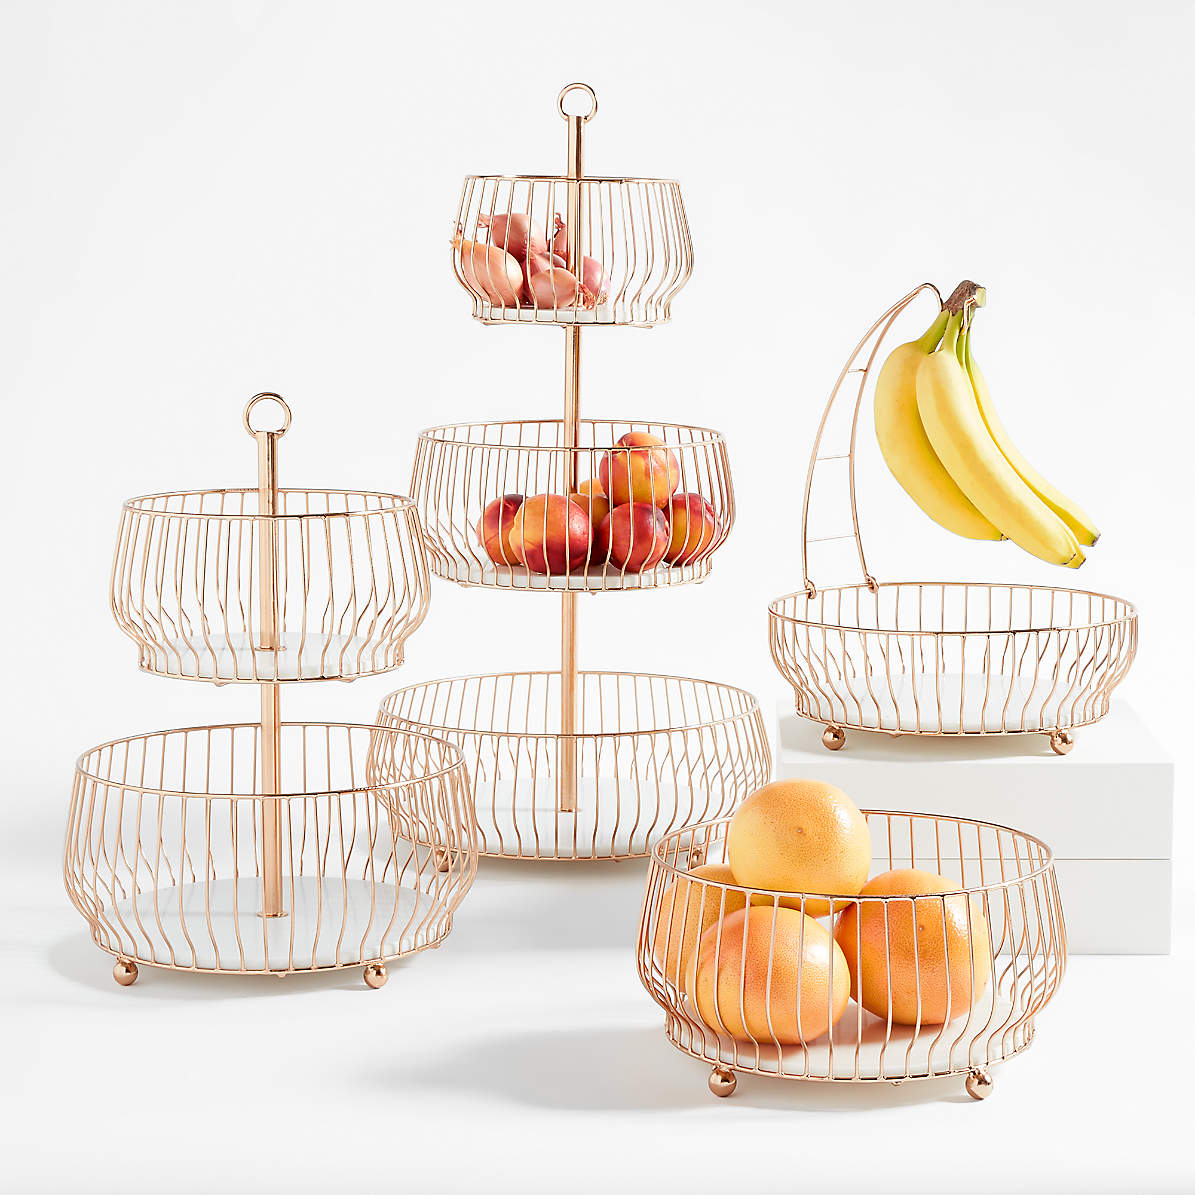 Cora White and Wood 2-Tier Fruit Basket + Reviews